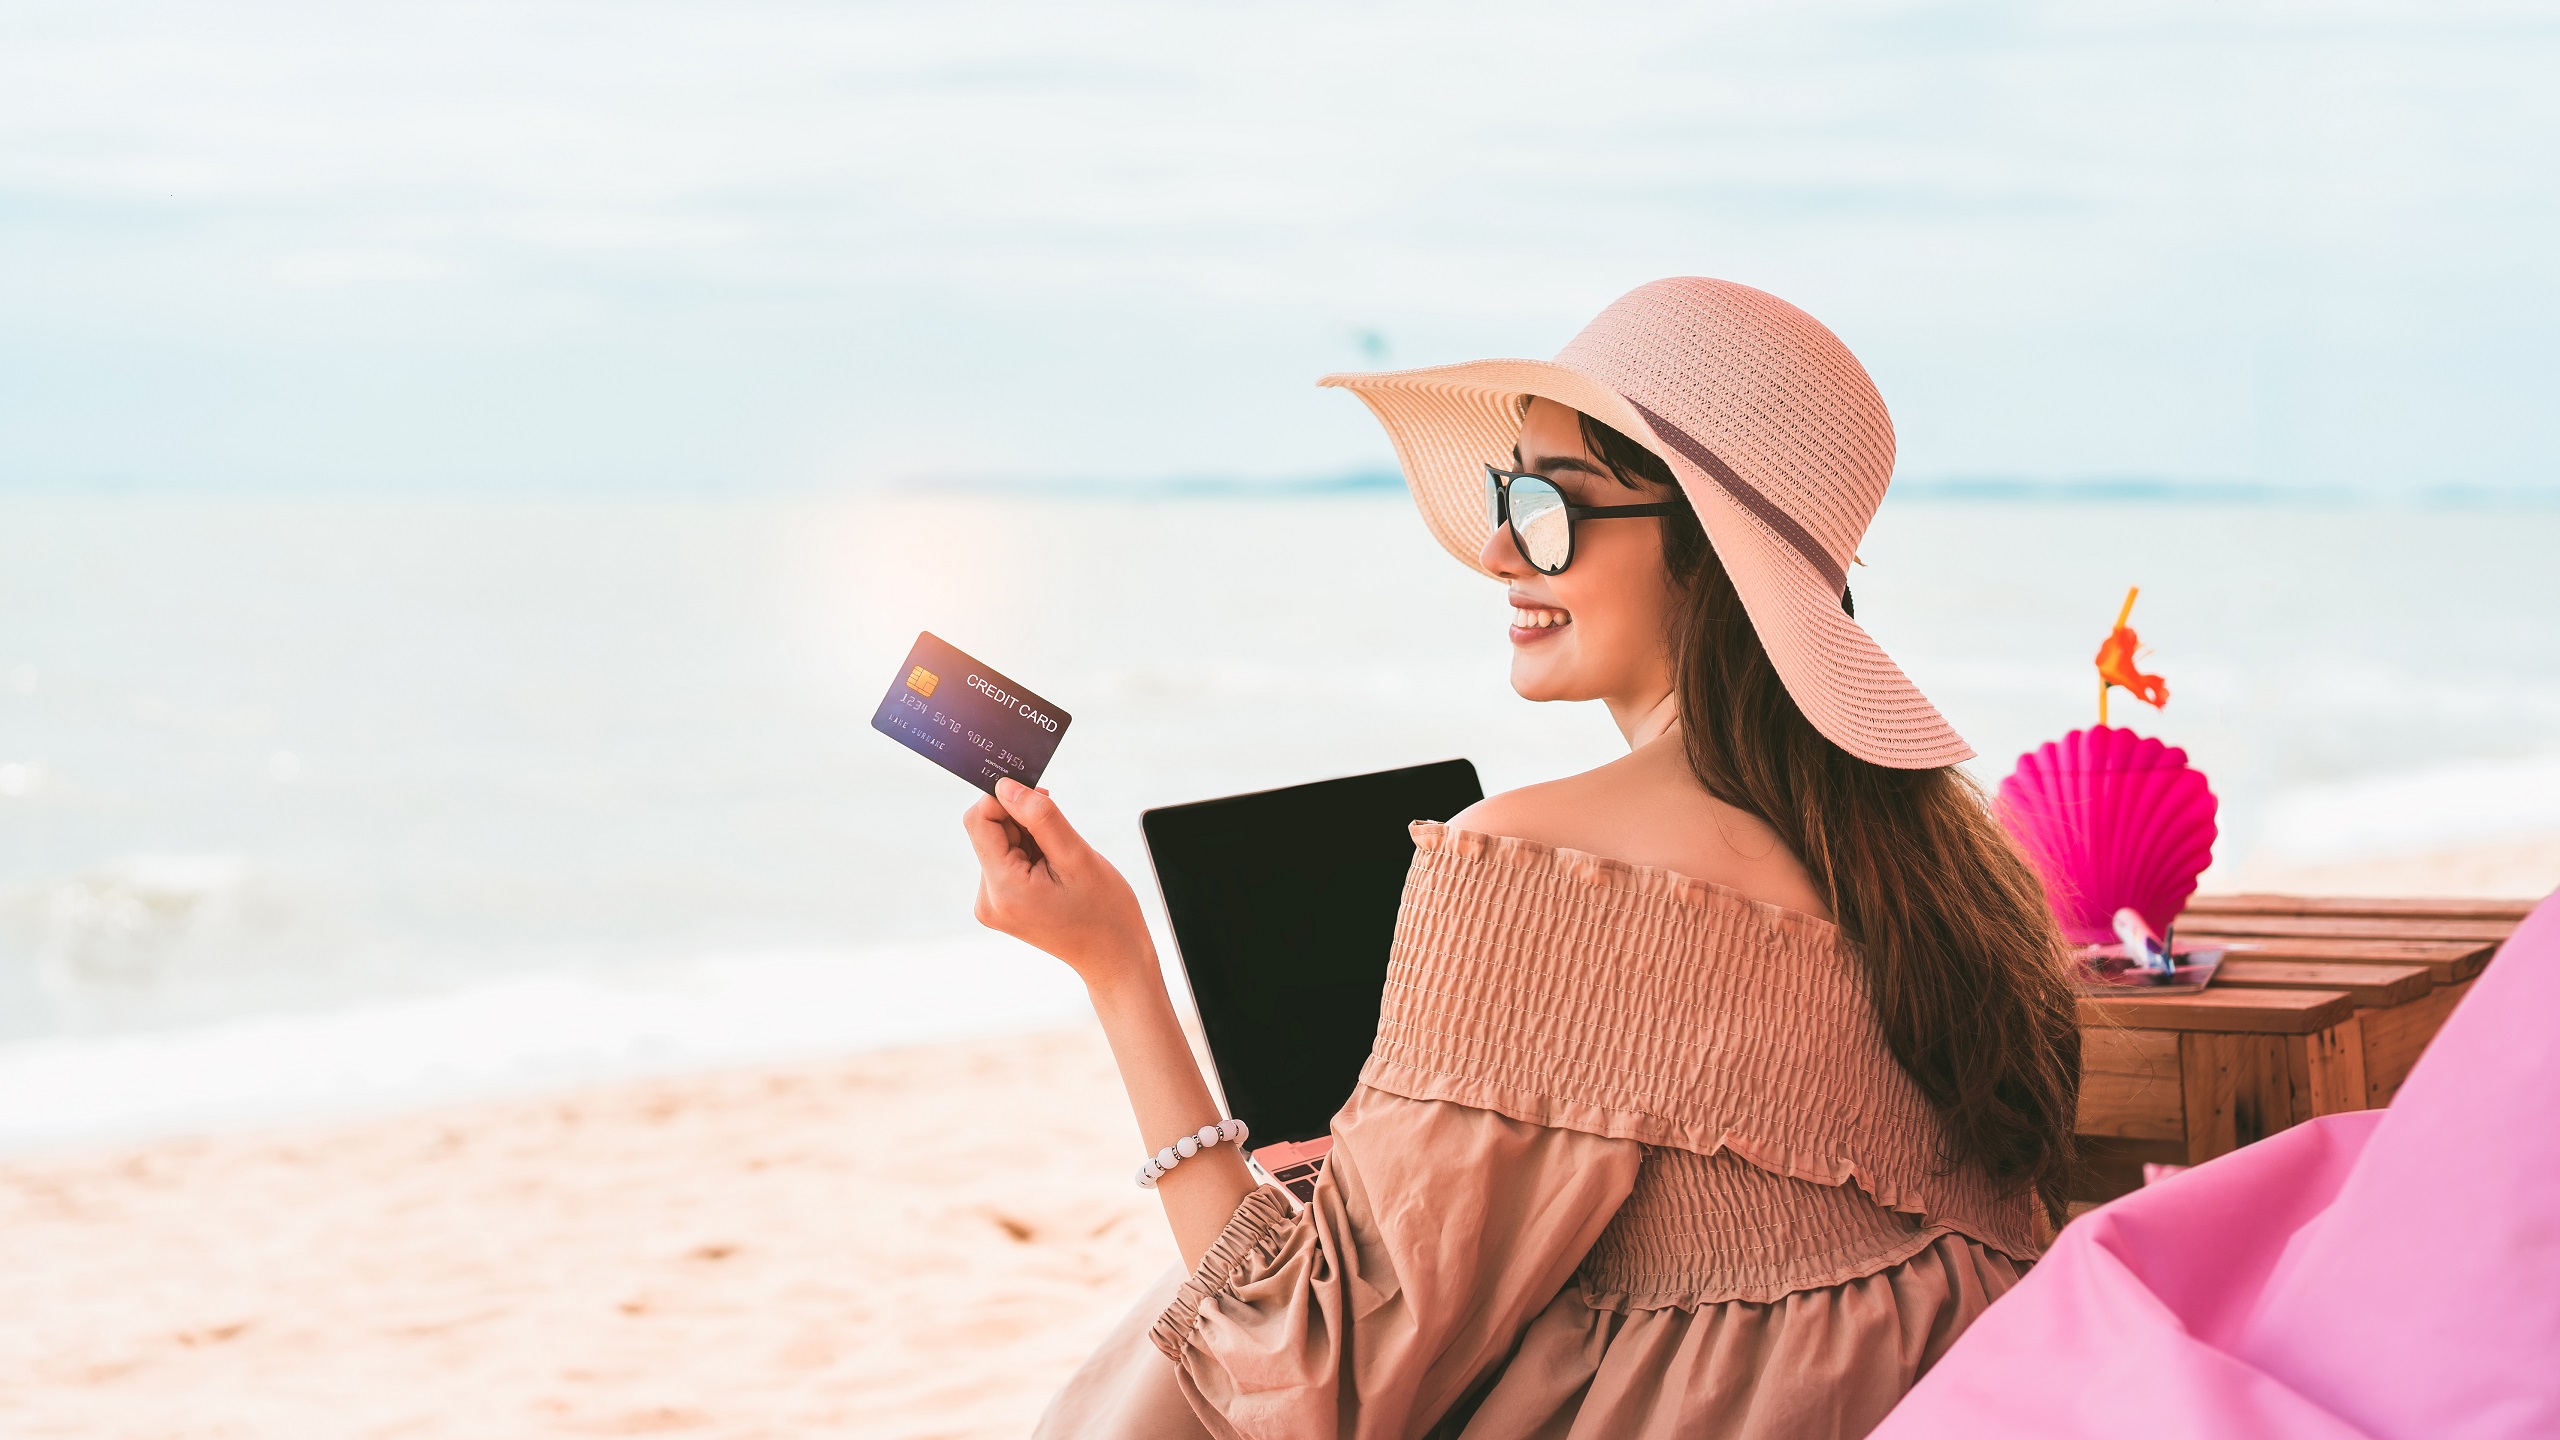 Today's Travel Tip Tuesday: Make sure to use no-fee bank cards